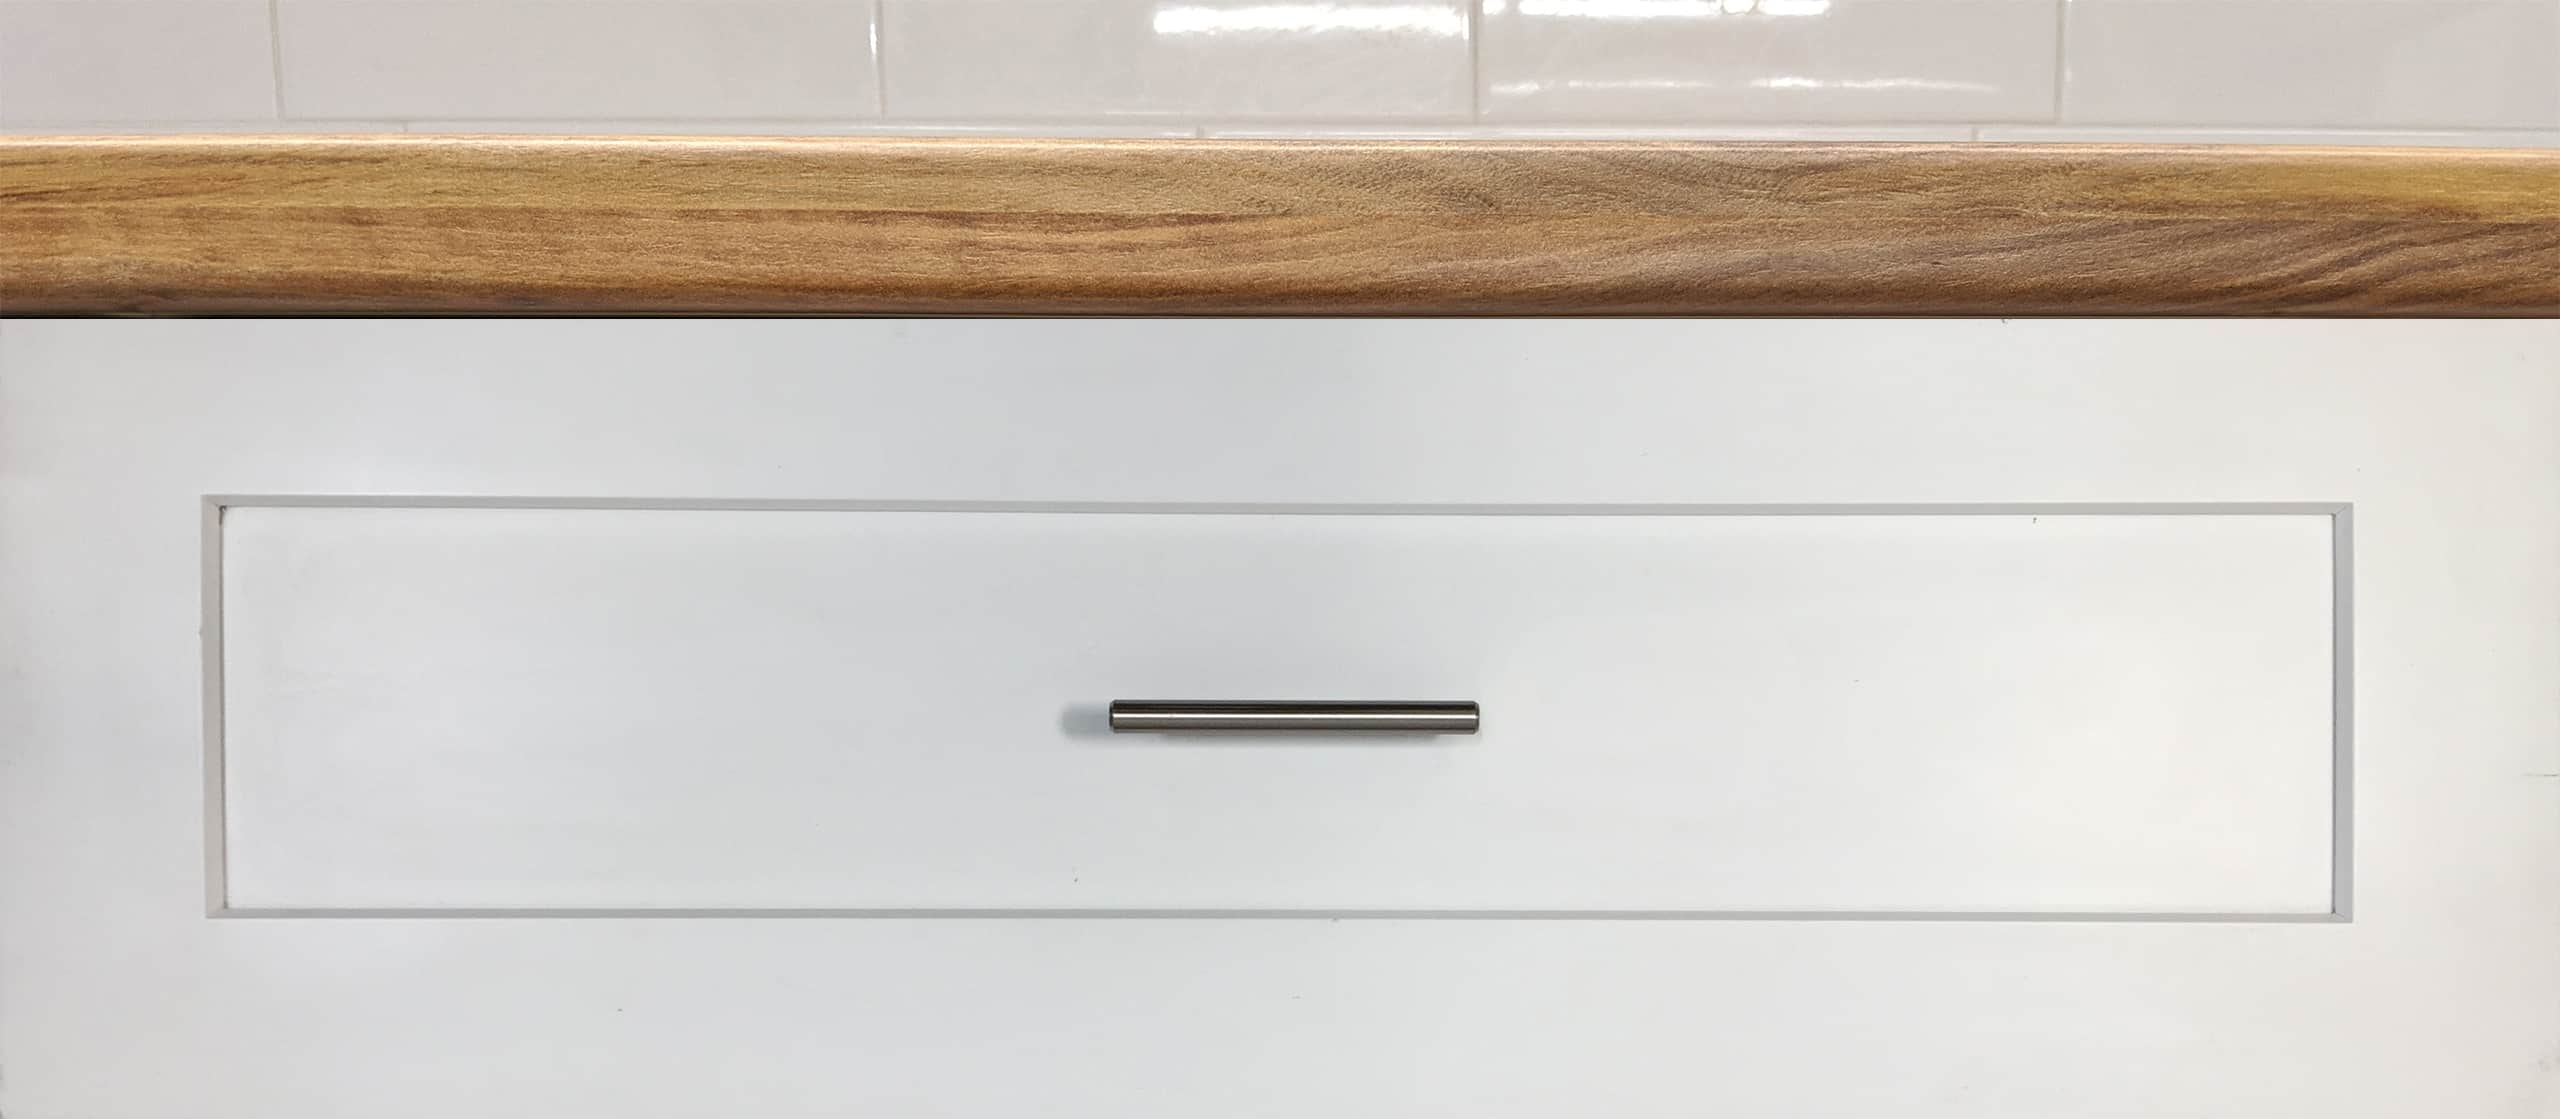 How to Install Handles and Knobs on Shaker Drawer Fronts True